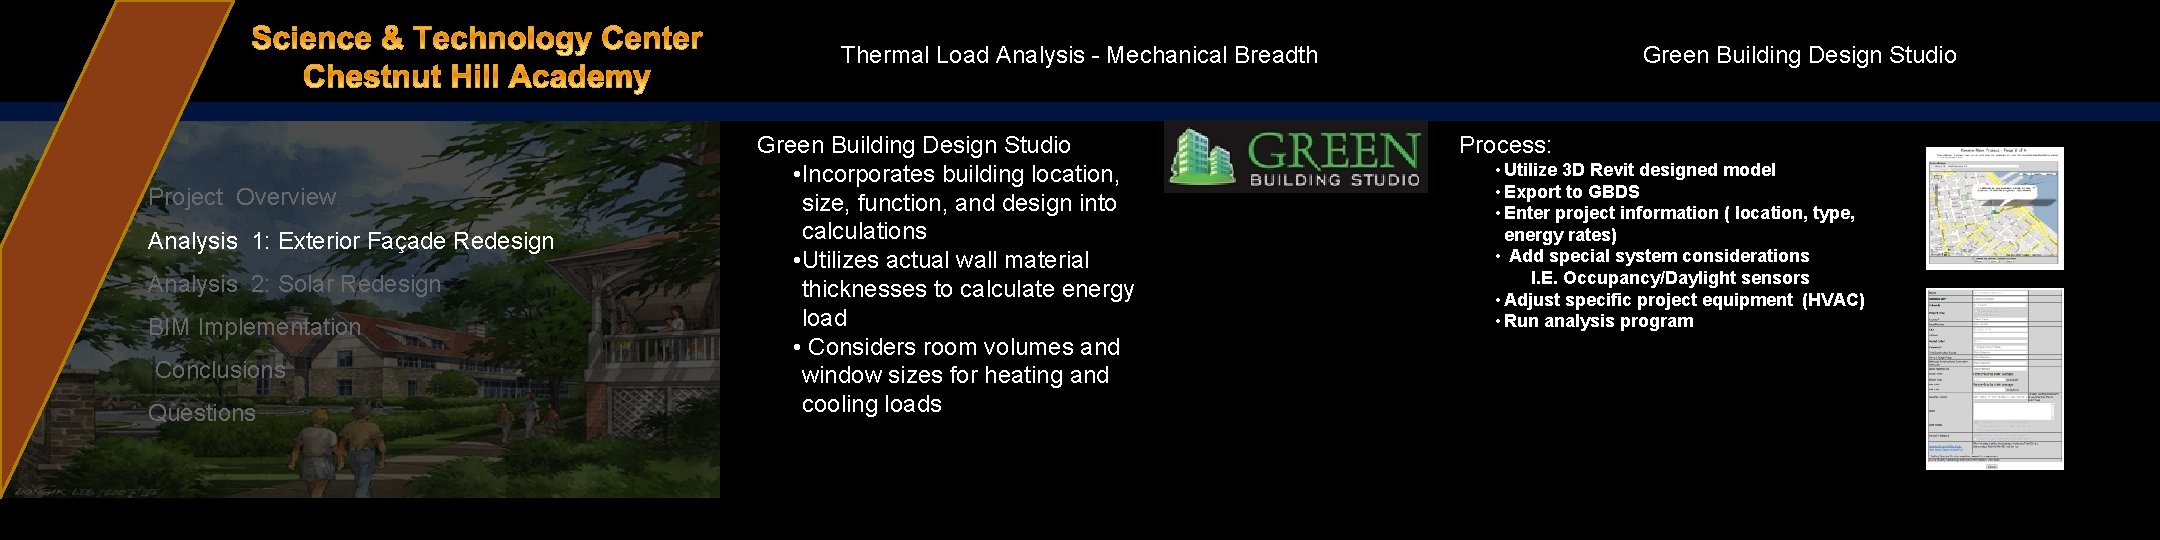 Green Building Design Studio Thermal Load Analysis - Mechanical Breadth Project Overview Analysis 1: